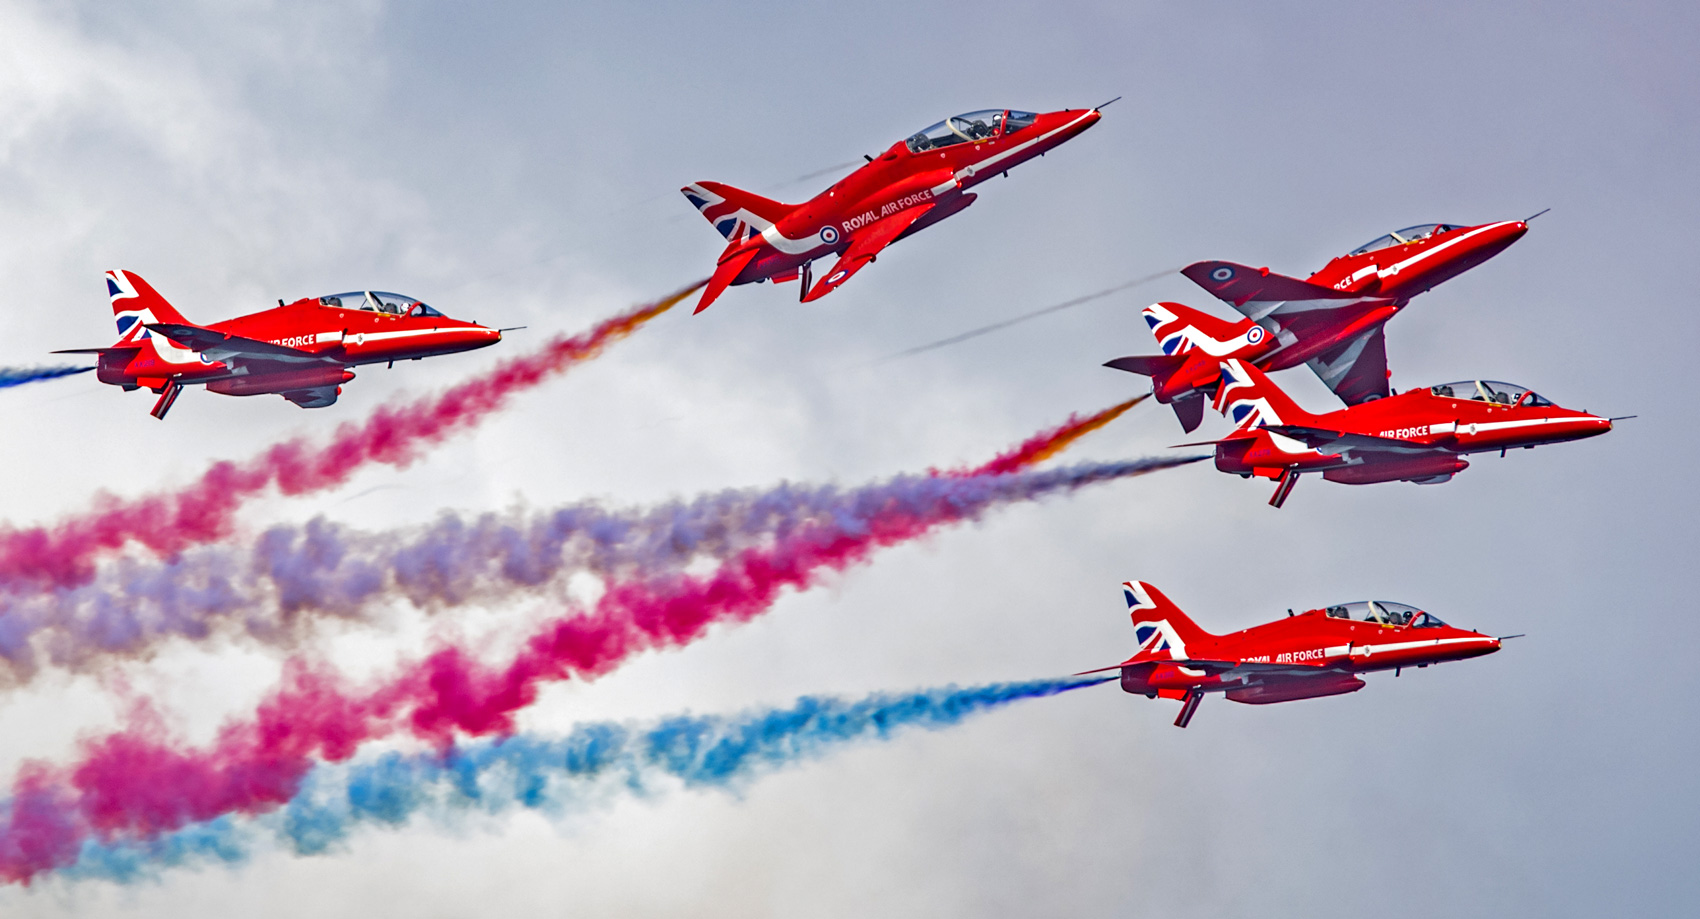 The red arrows aerobatics team flying with their signature coloured exhaust clouds